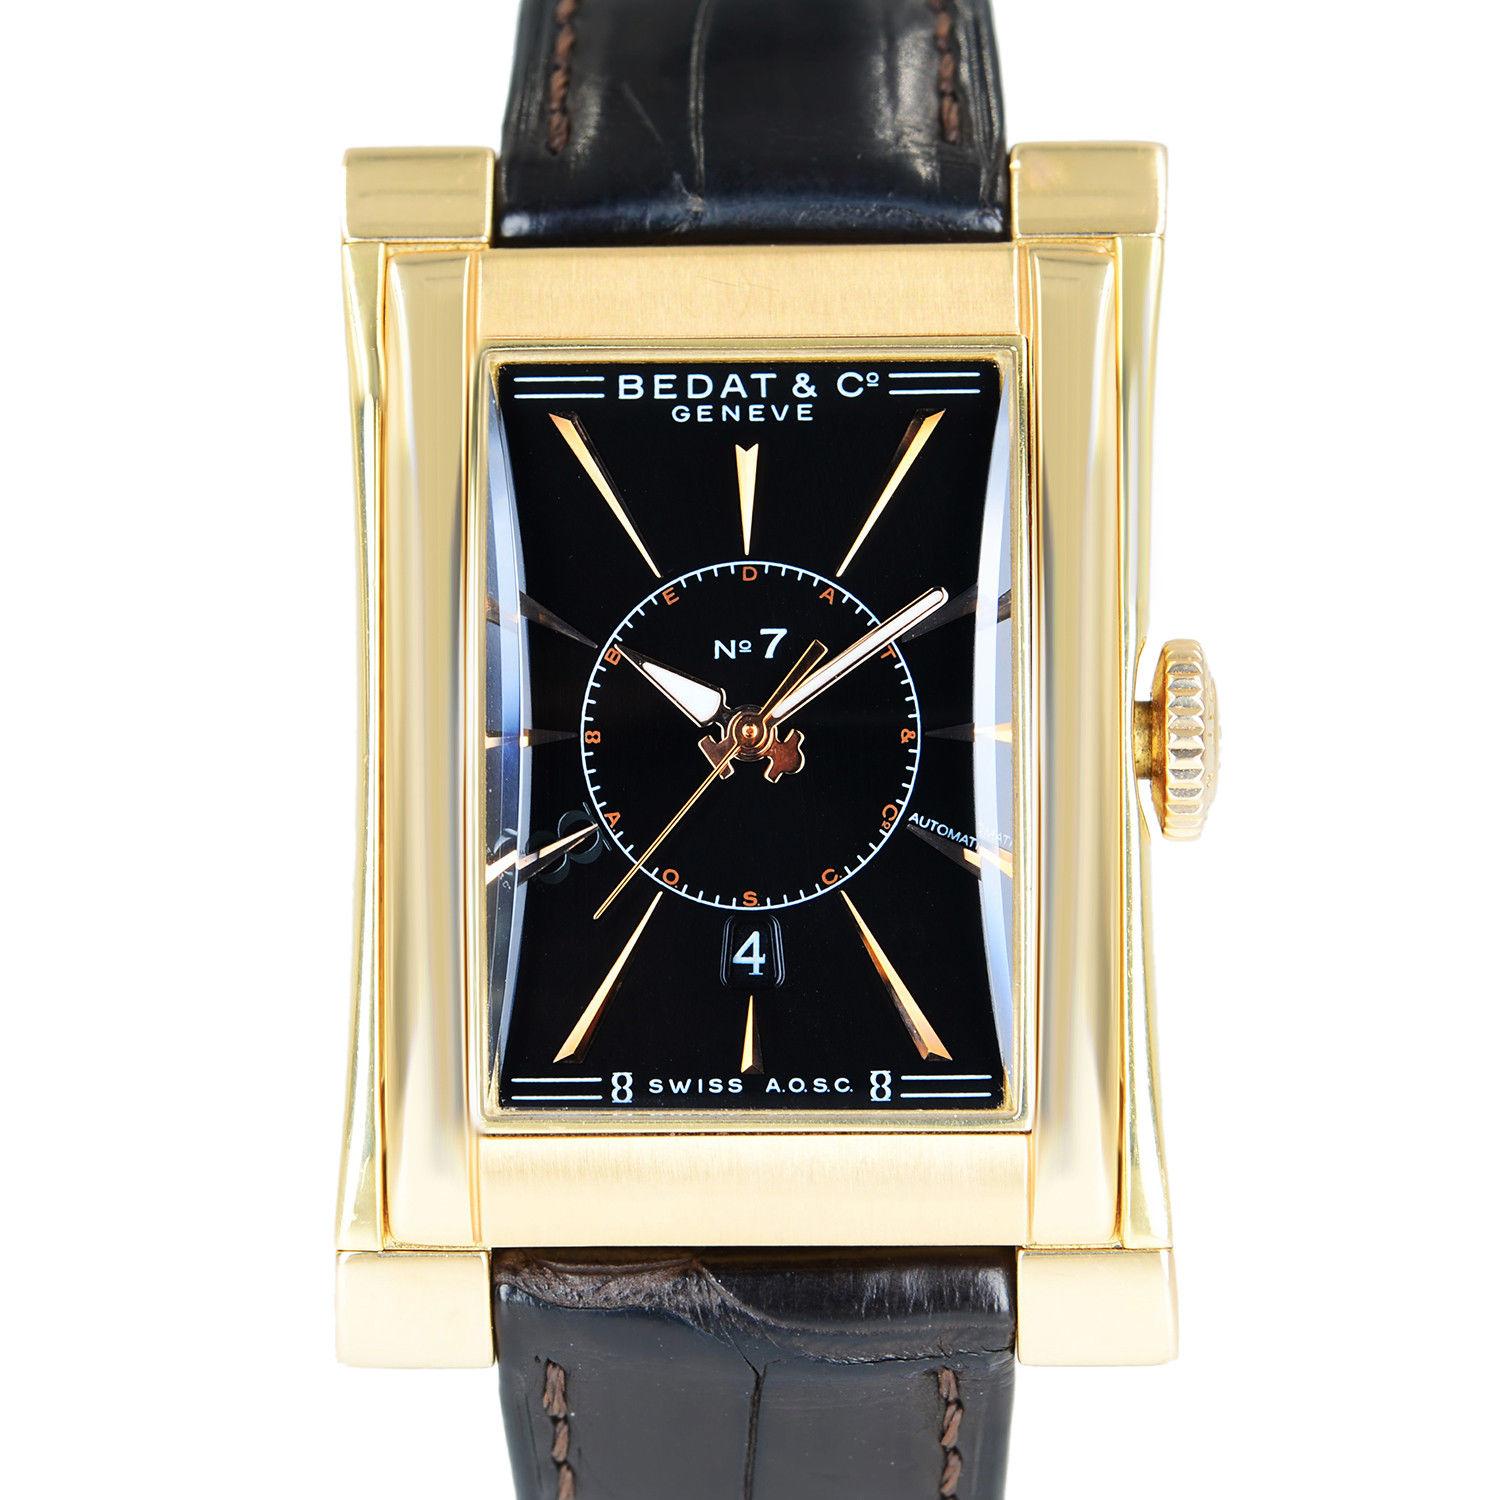 (20887)
This pre-owned Bedat & Co Nº7 n/a is a beautiful men's timepiece that is powered by an automatic movement which is cased in a yellow gold case. It has a rectangle shape face, date dial and has hand sticks style markers. It is completed with